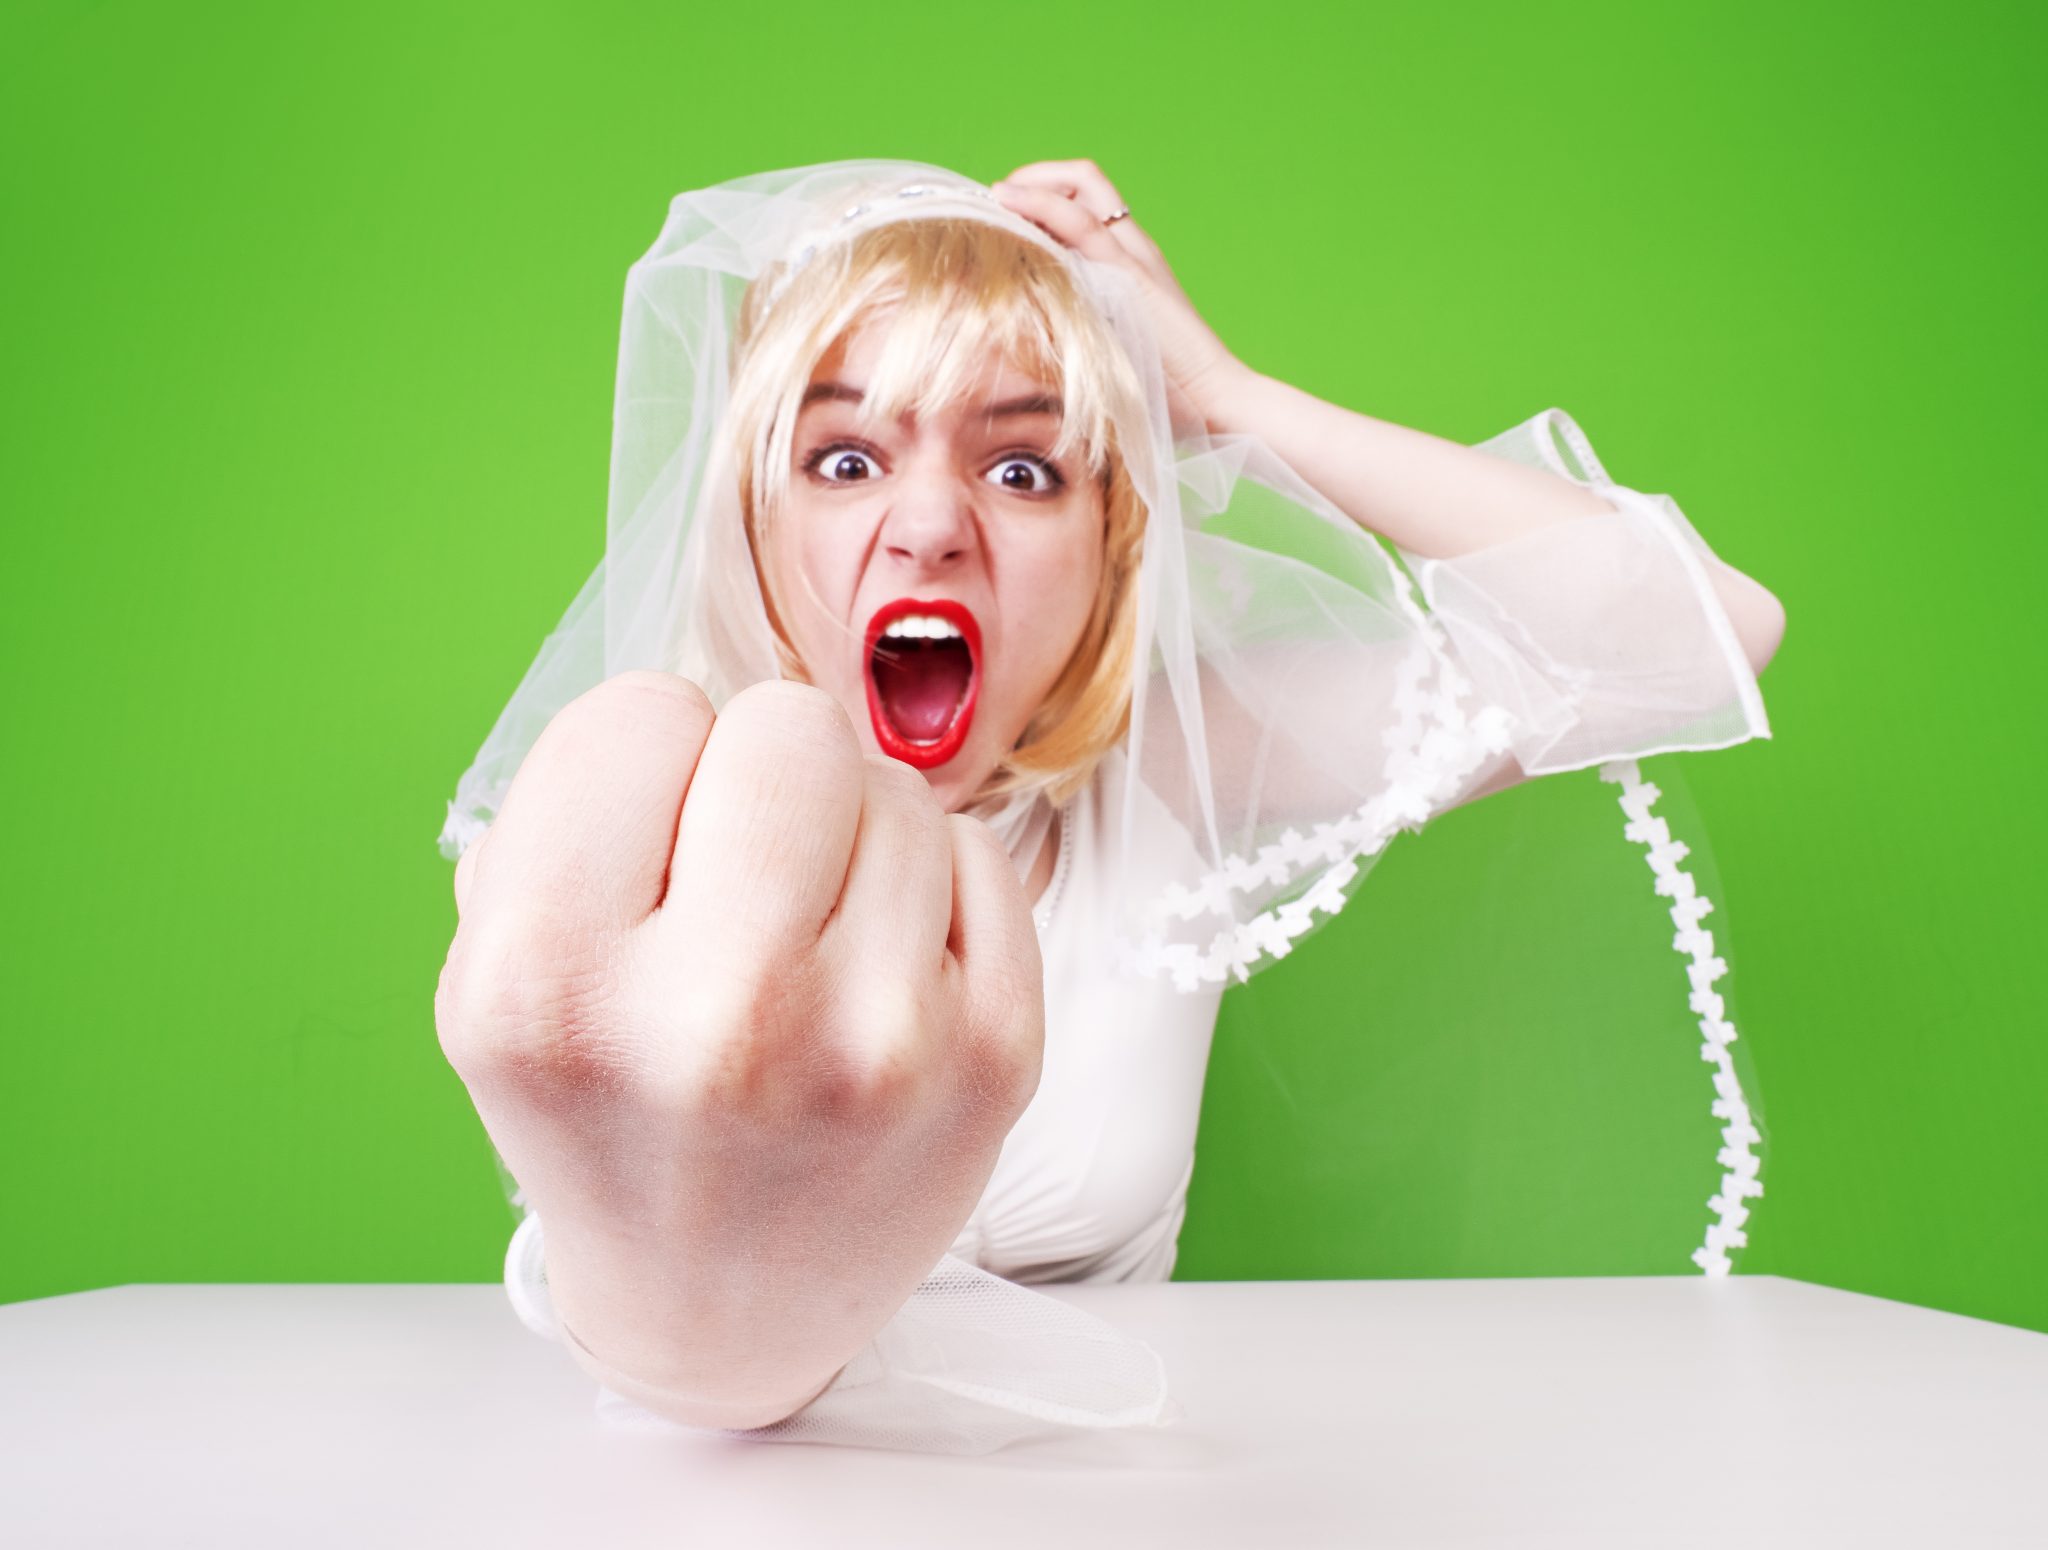 Angry bride clenching her fist.